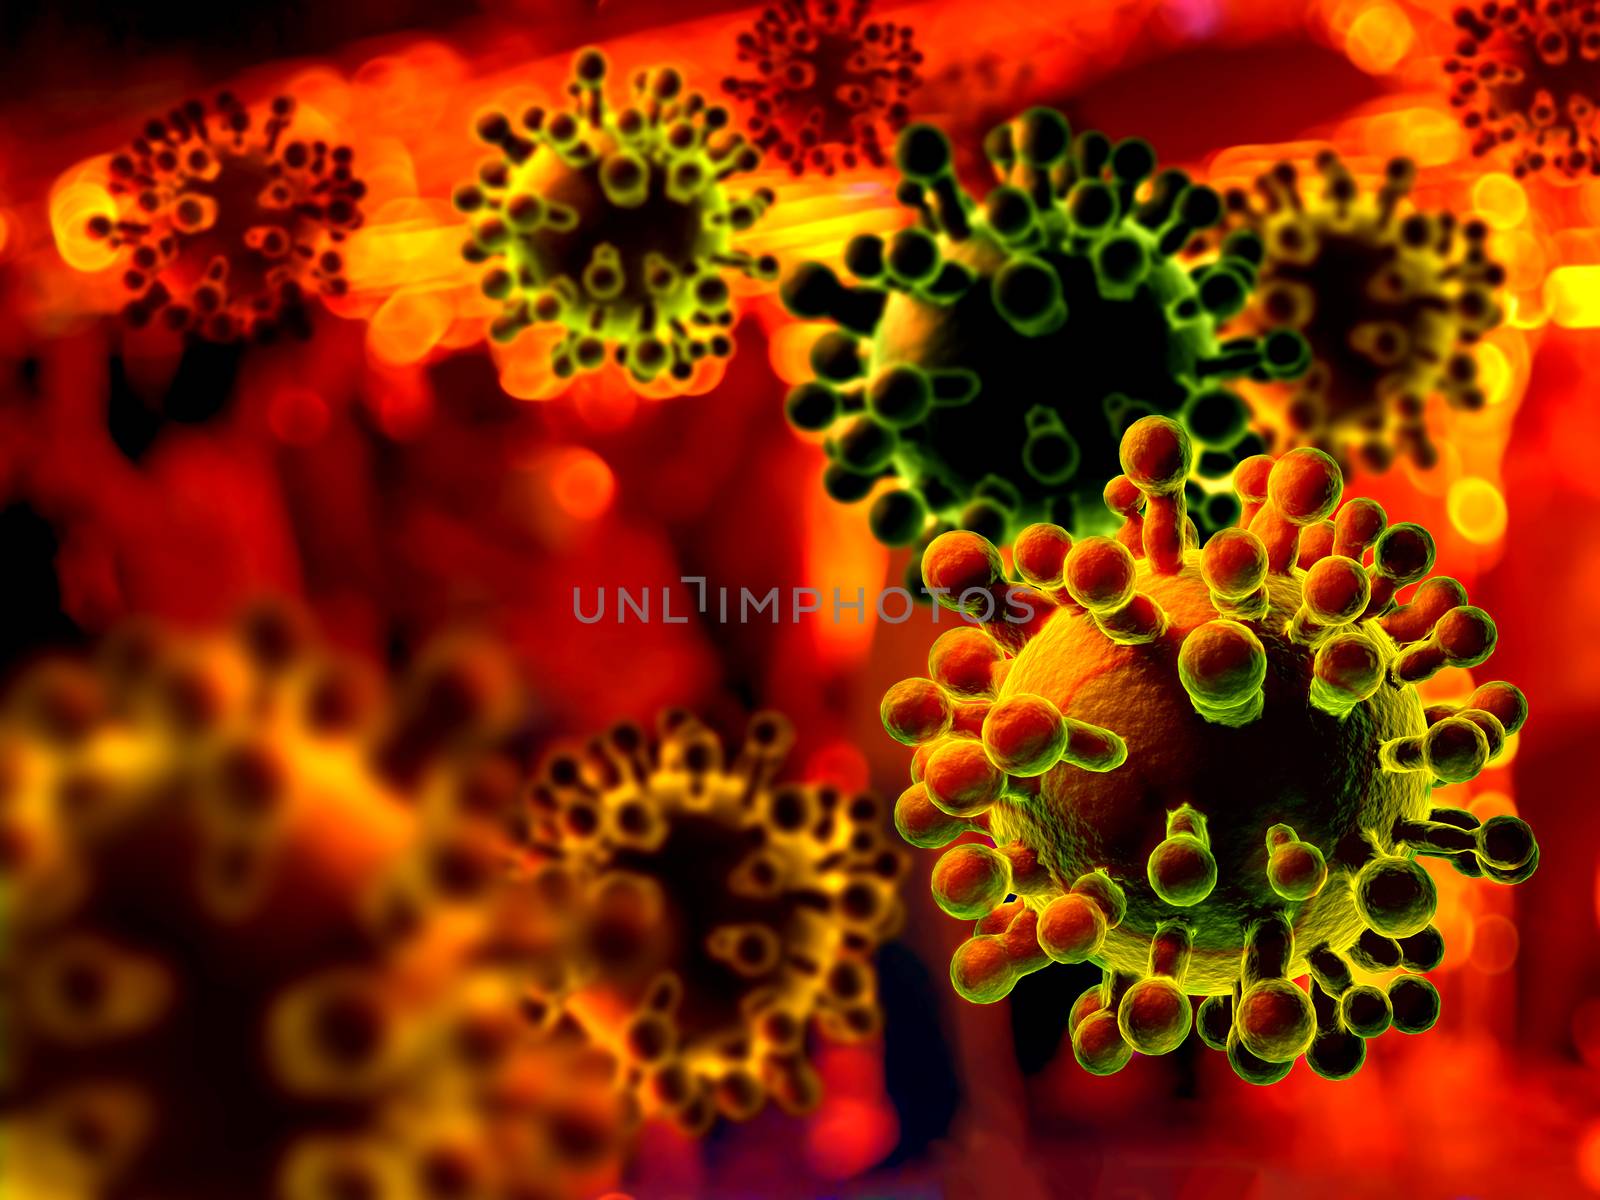 Illustration of corona viruses, covid-19 on red background.  Contagion and propagation of a disease.  3D illustration.